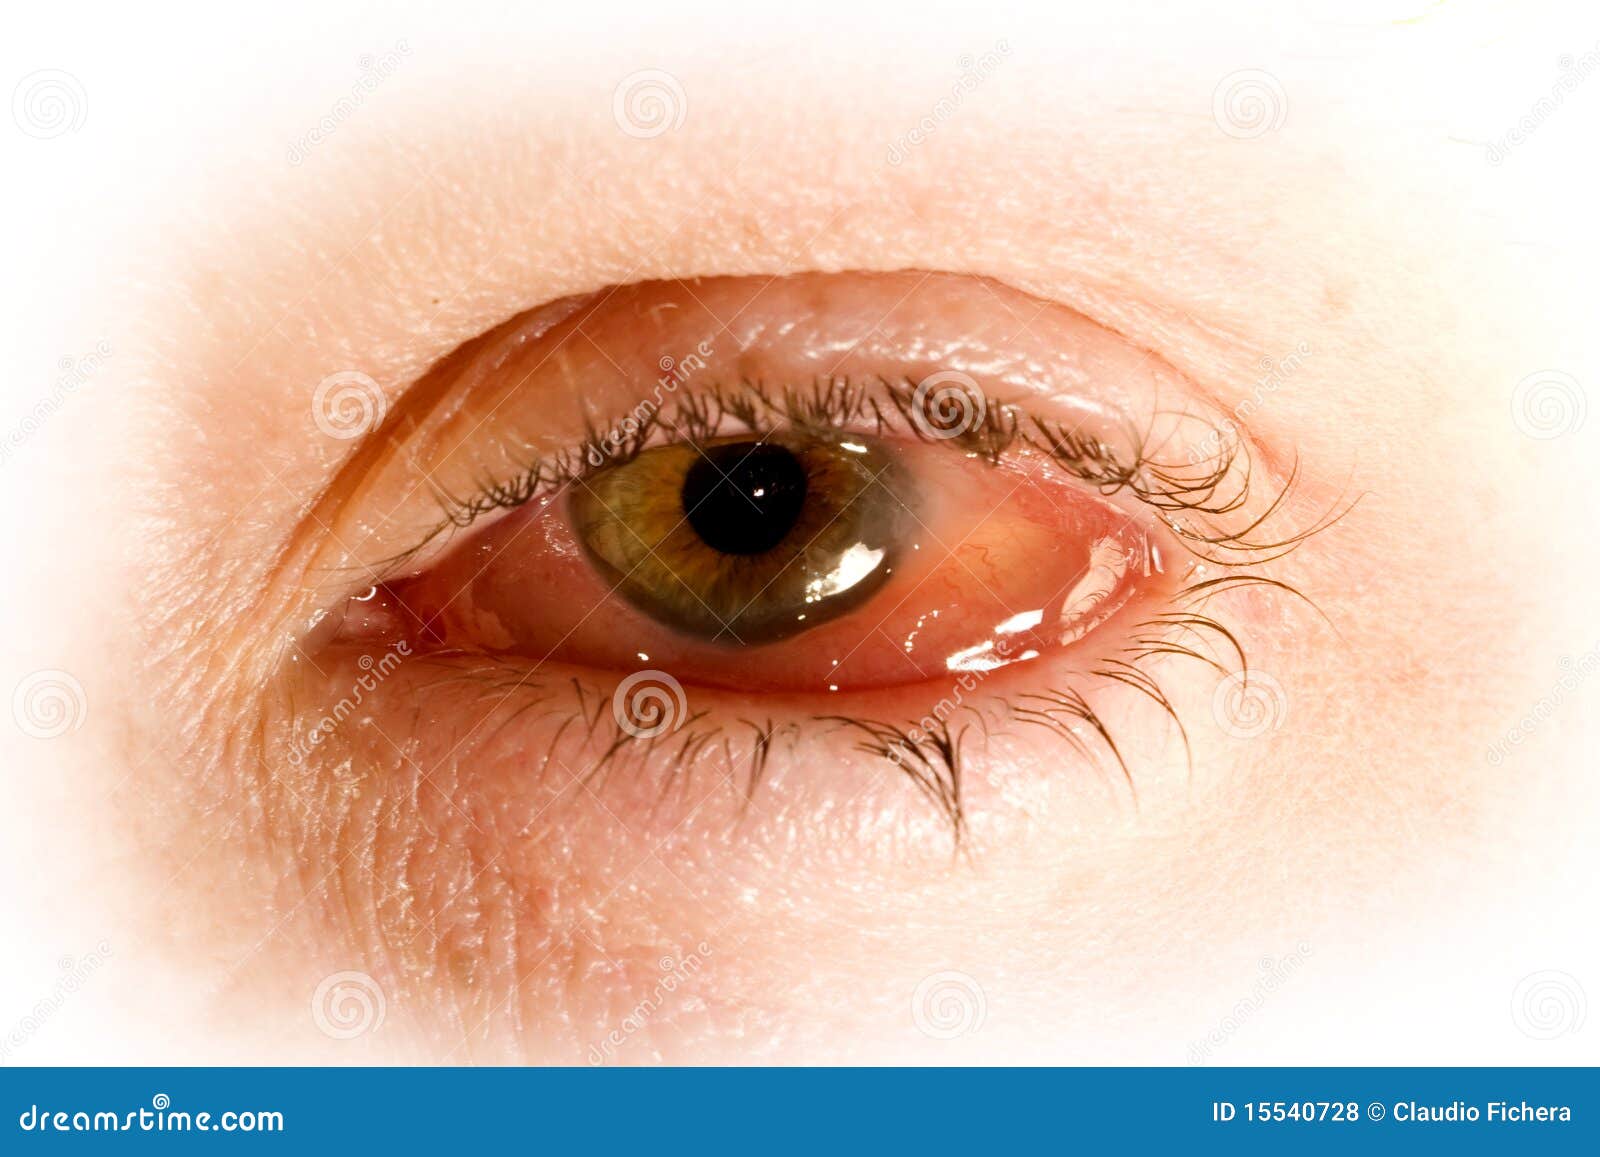 Sick Eye with Conjunctivitis Stock Photo - Image of allergy, cold: 15540728